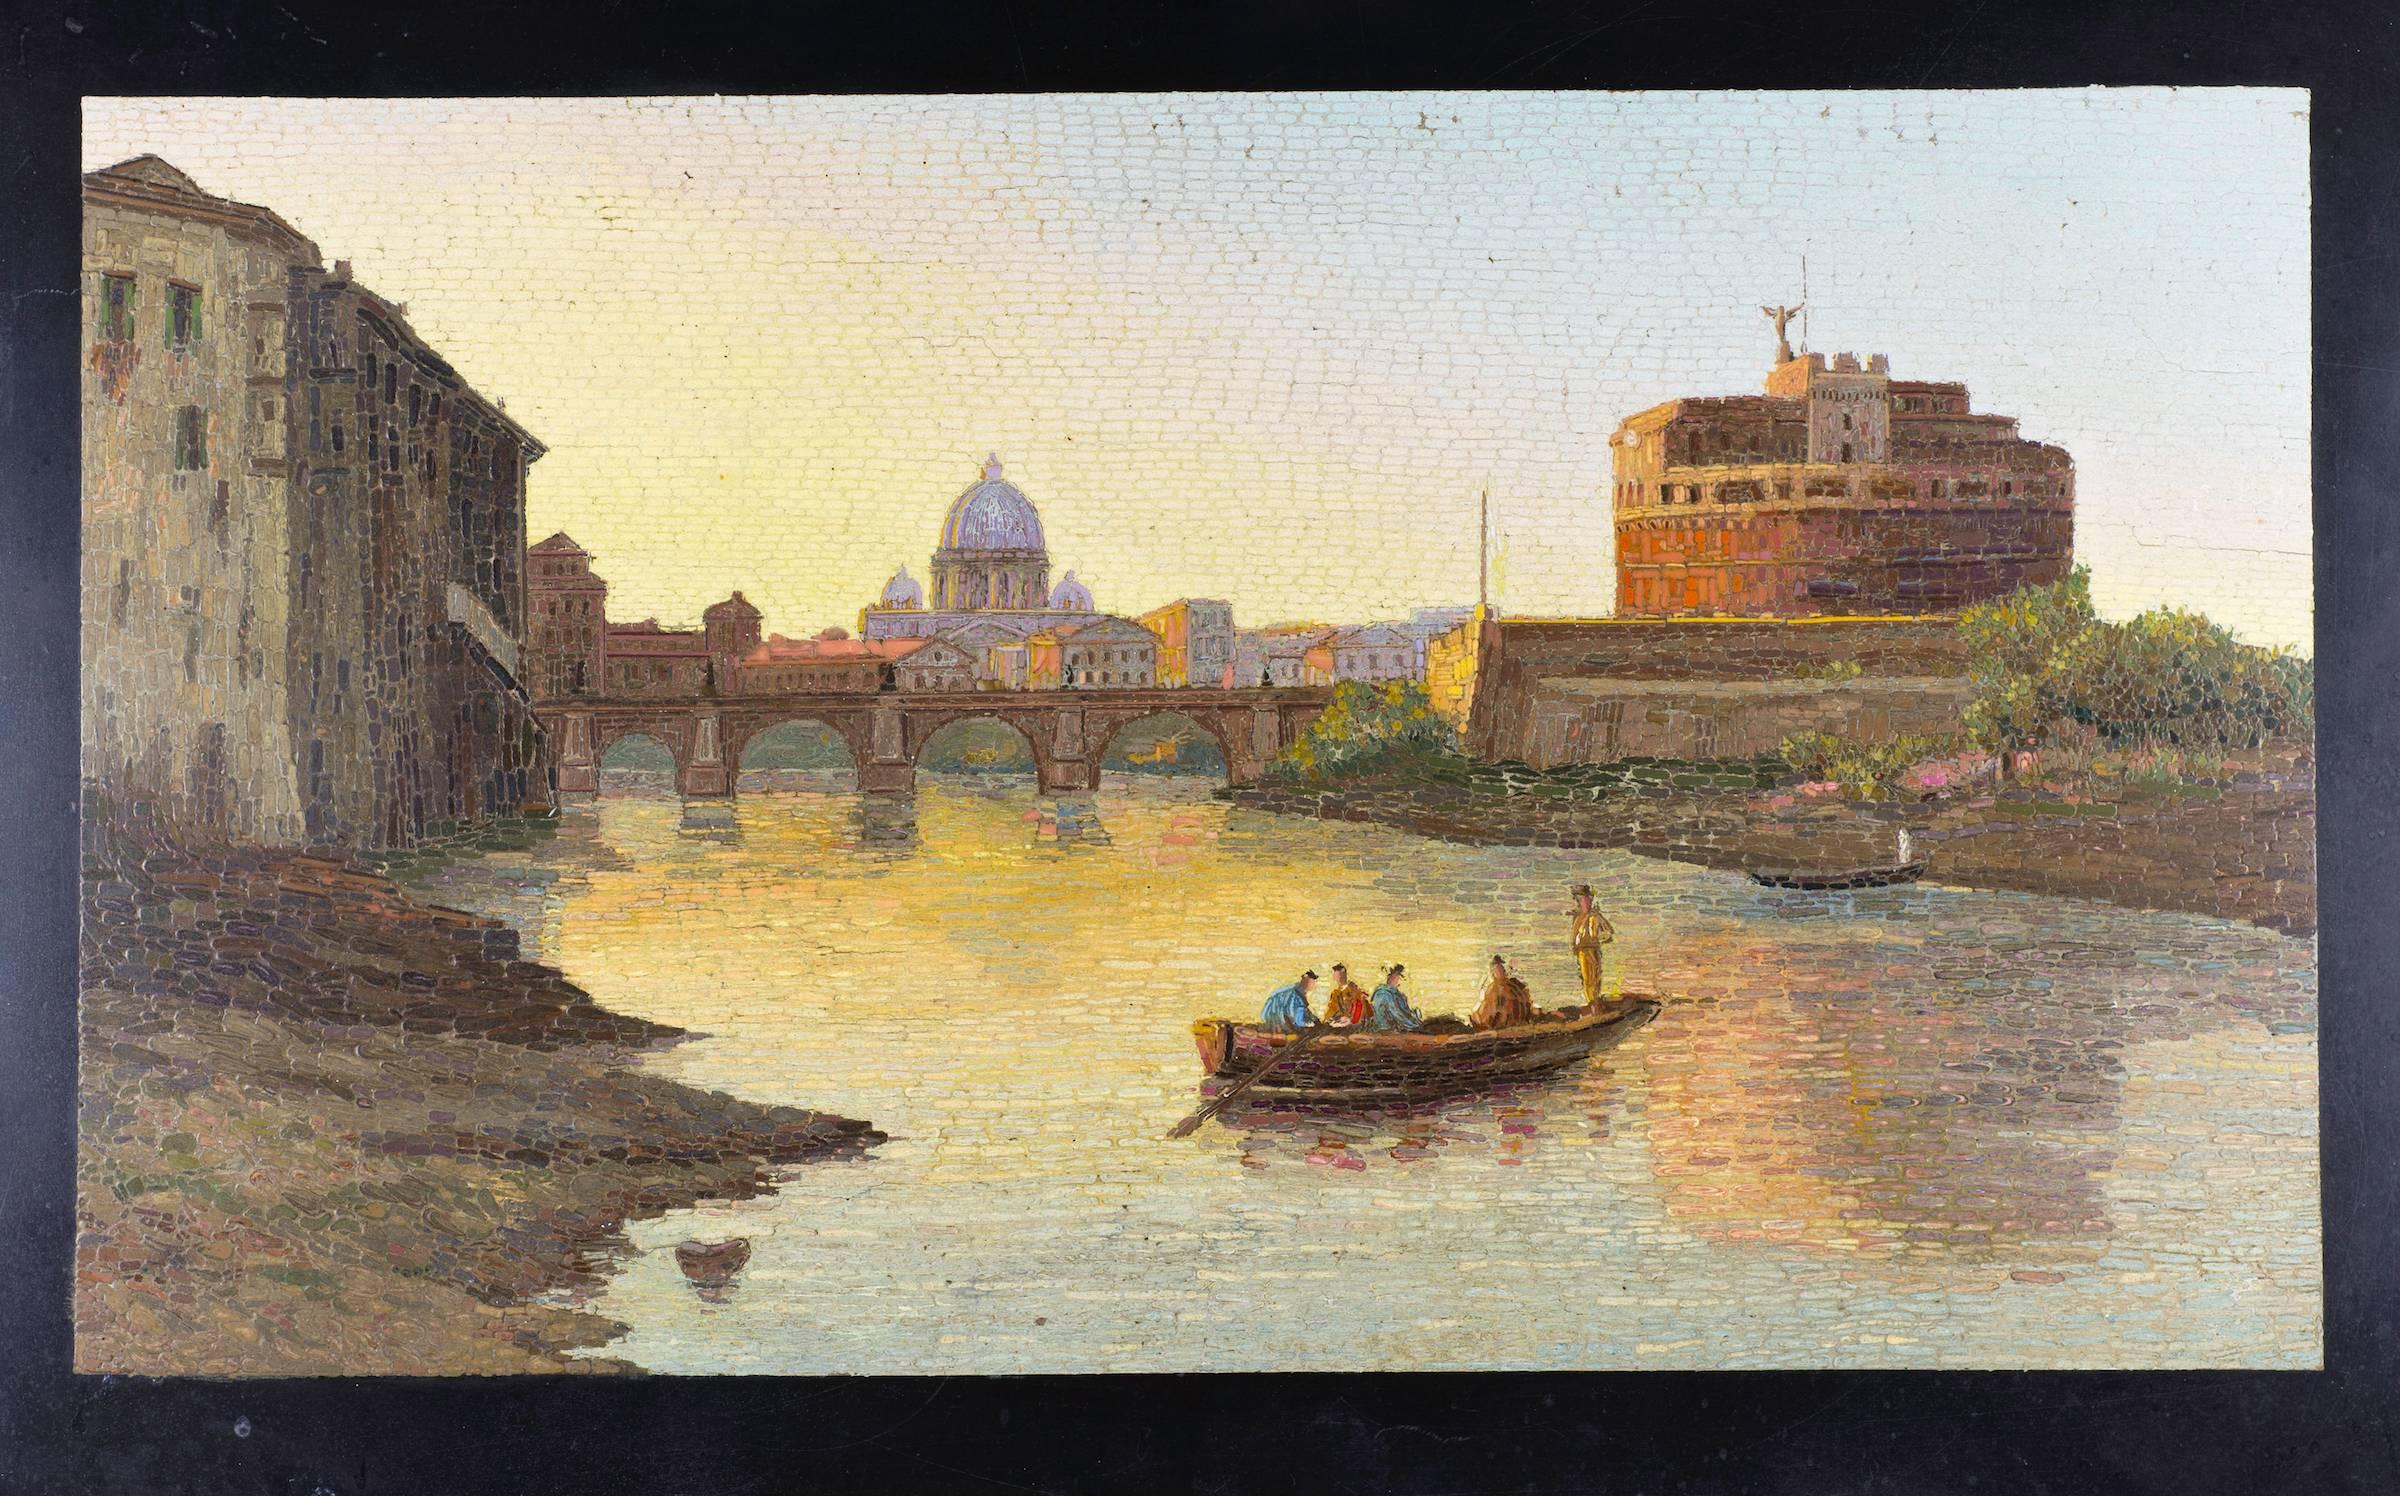 An unusually large, 19th century, micromosaic view of Rome, by the Vatican Mosaic Studio.

8